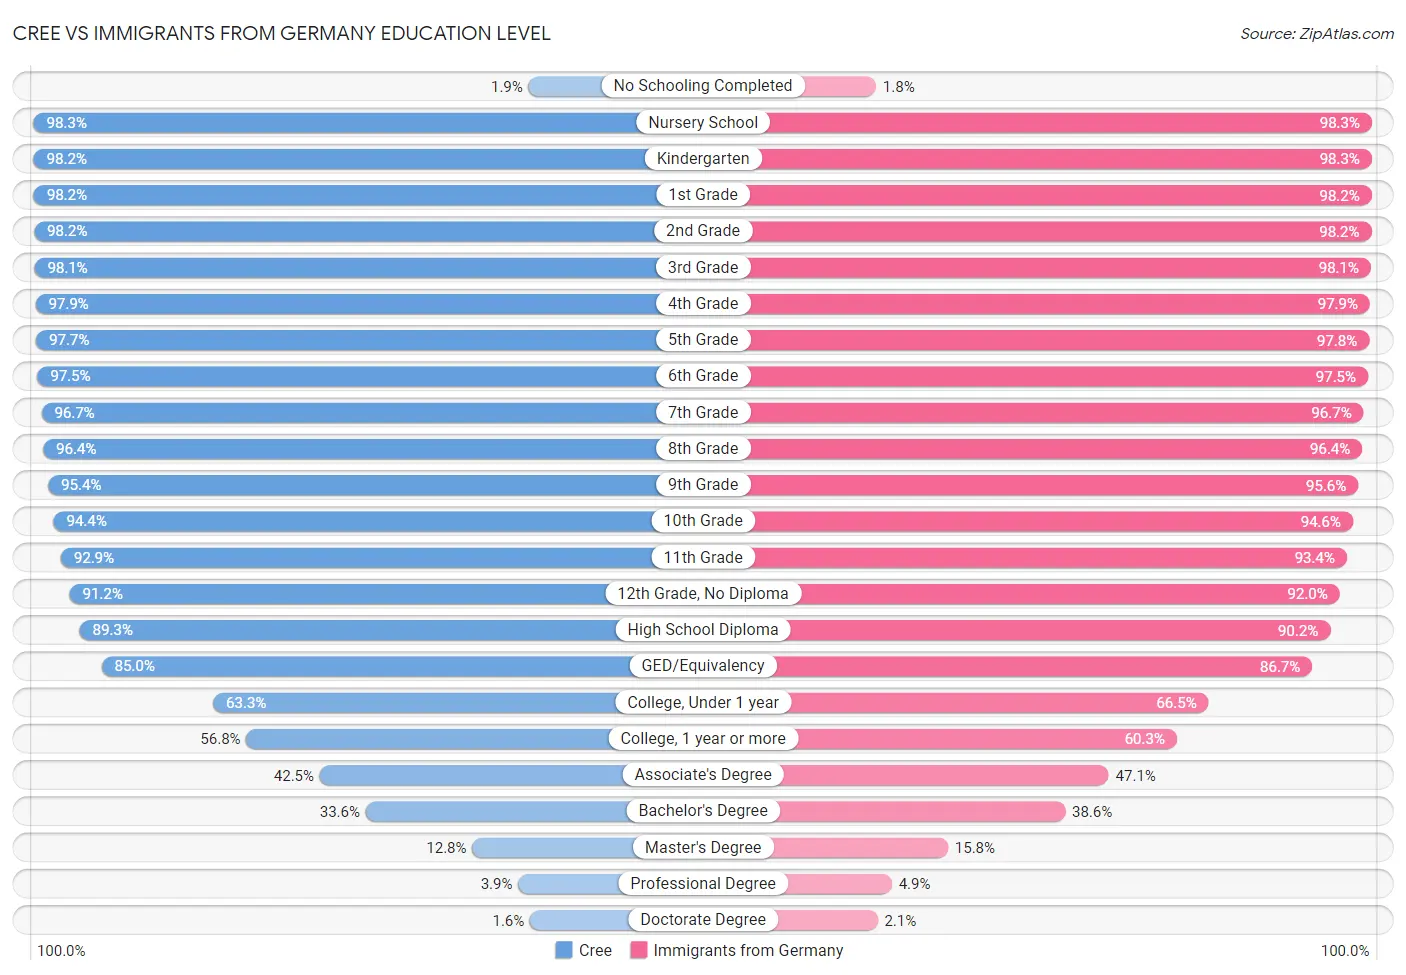 Cree vs Immigrants from Germany Education Level